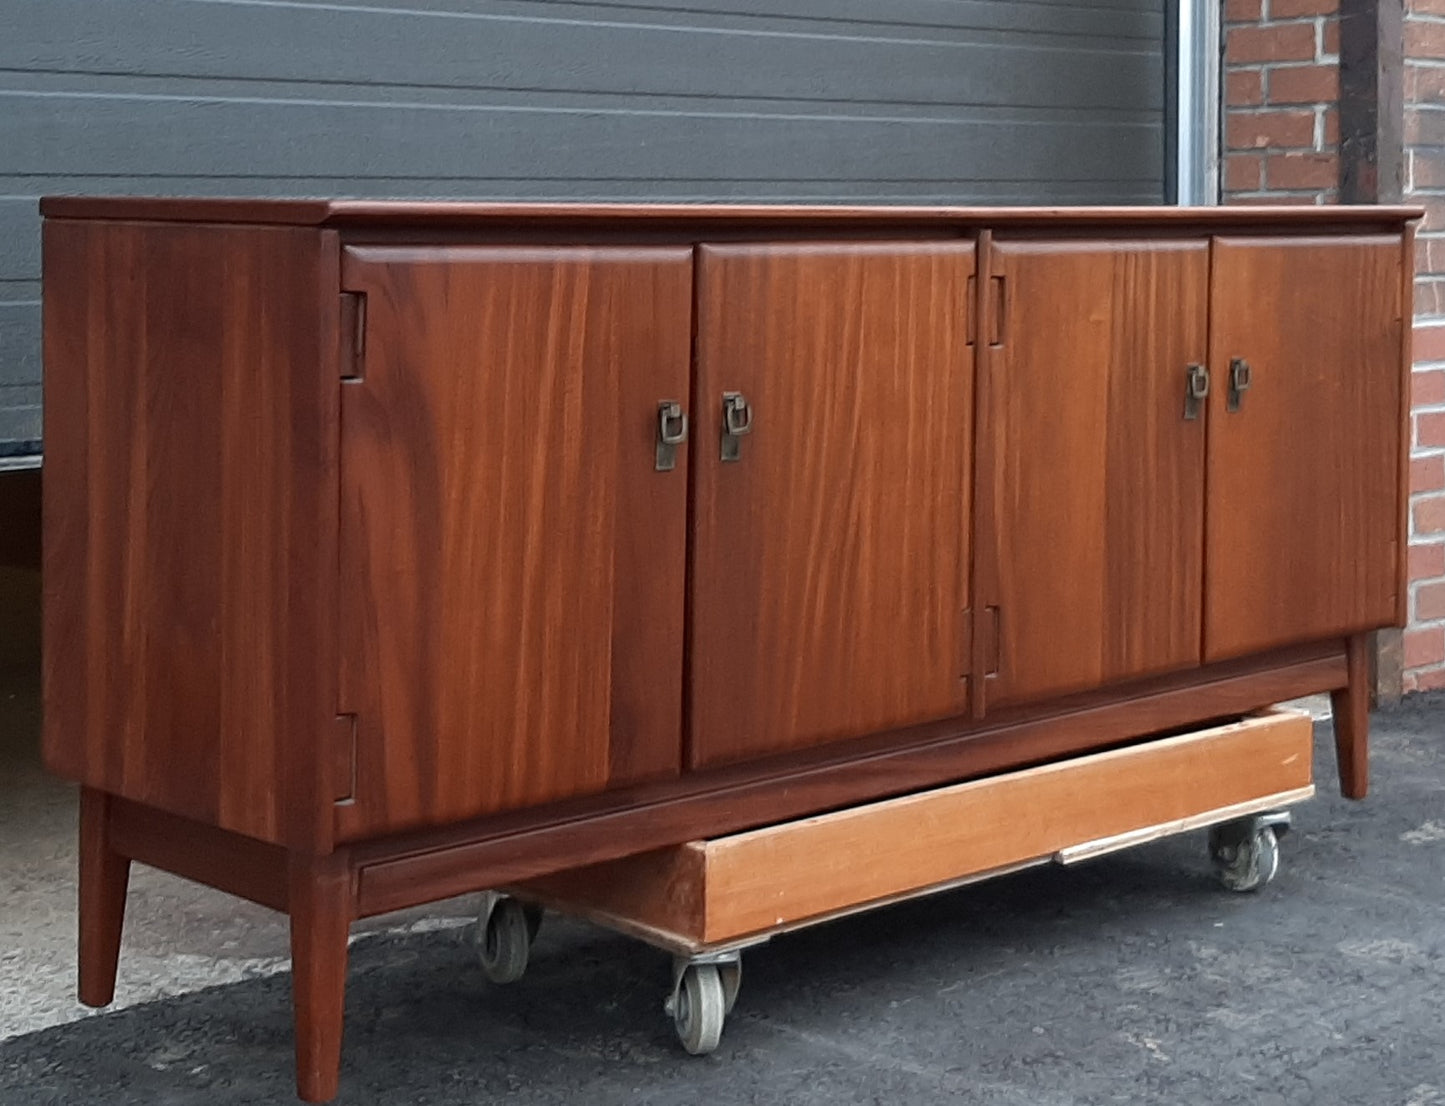 REFINISHED MCM  SOLID TEAK Sideboard TV Media Console by Imperial 66" , PERFECT - Mid Century Modern Toronto